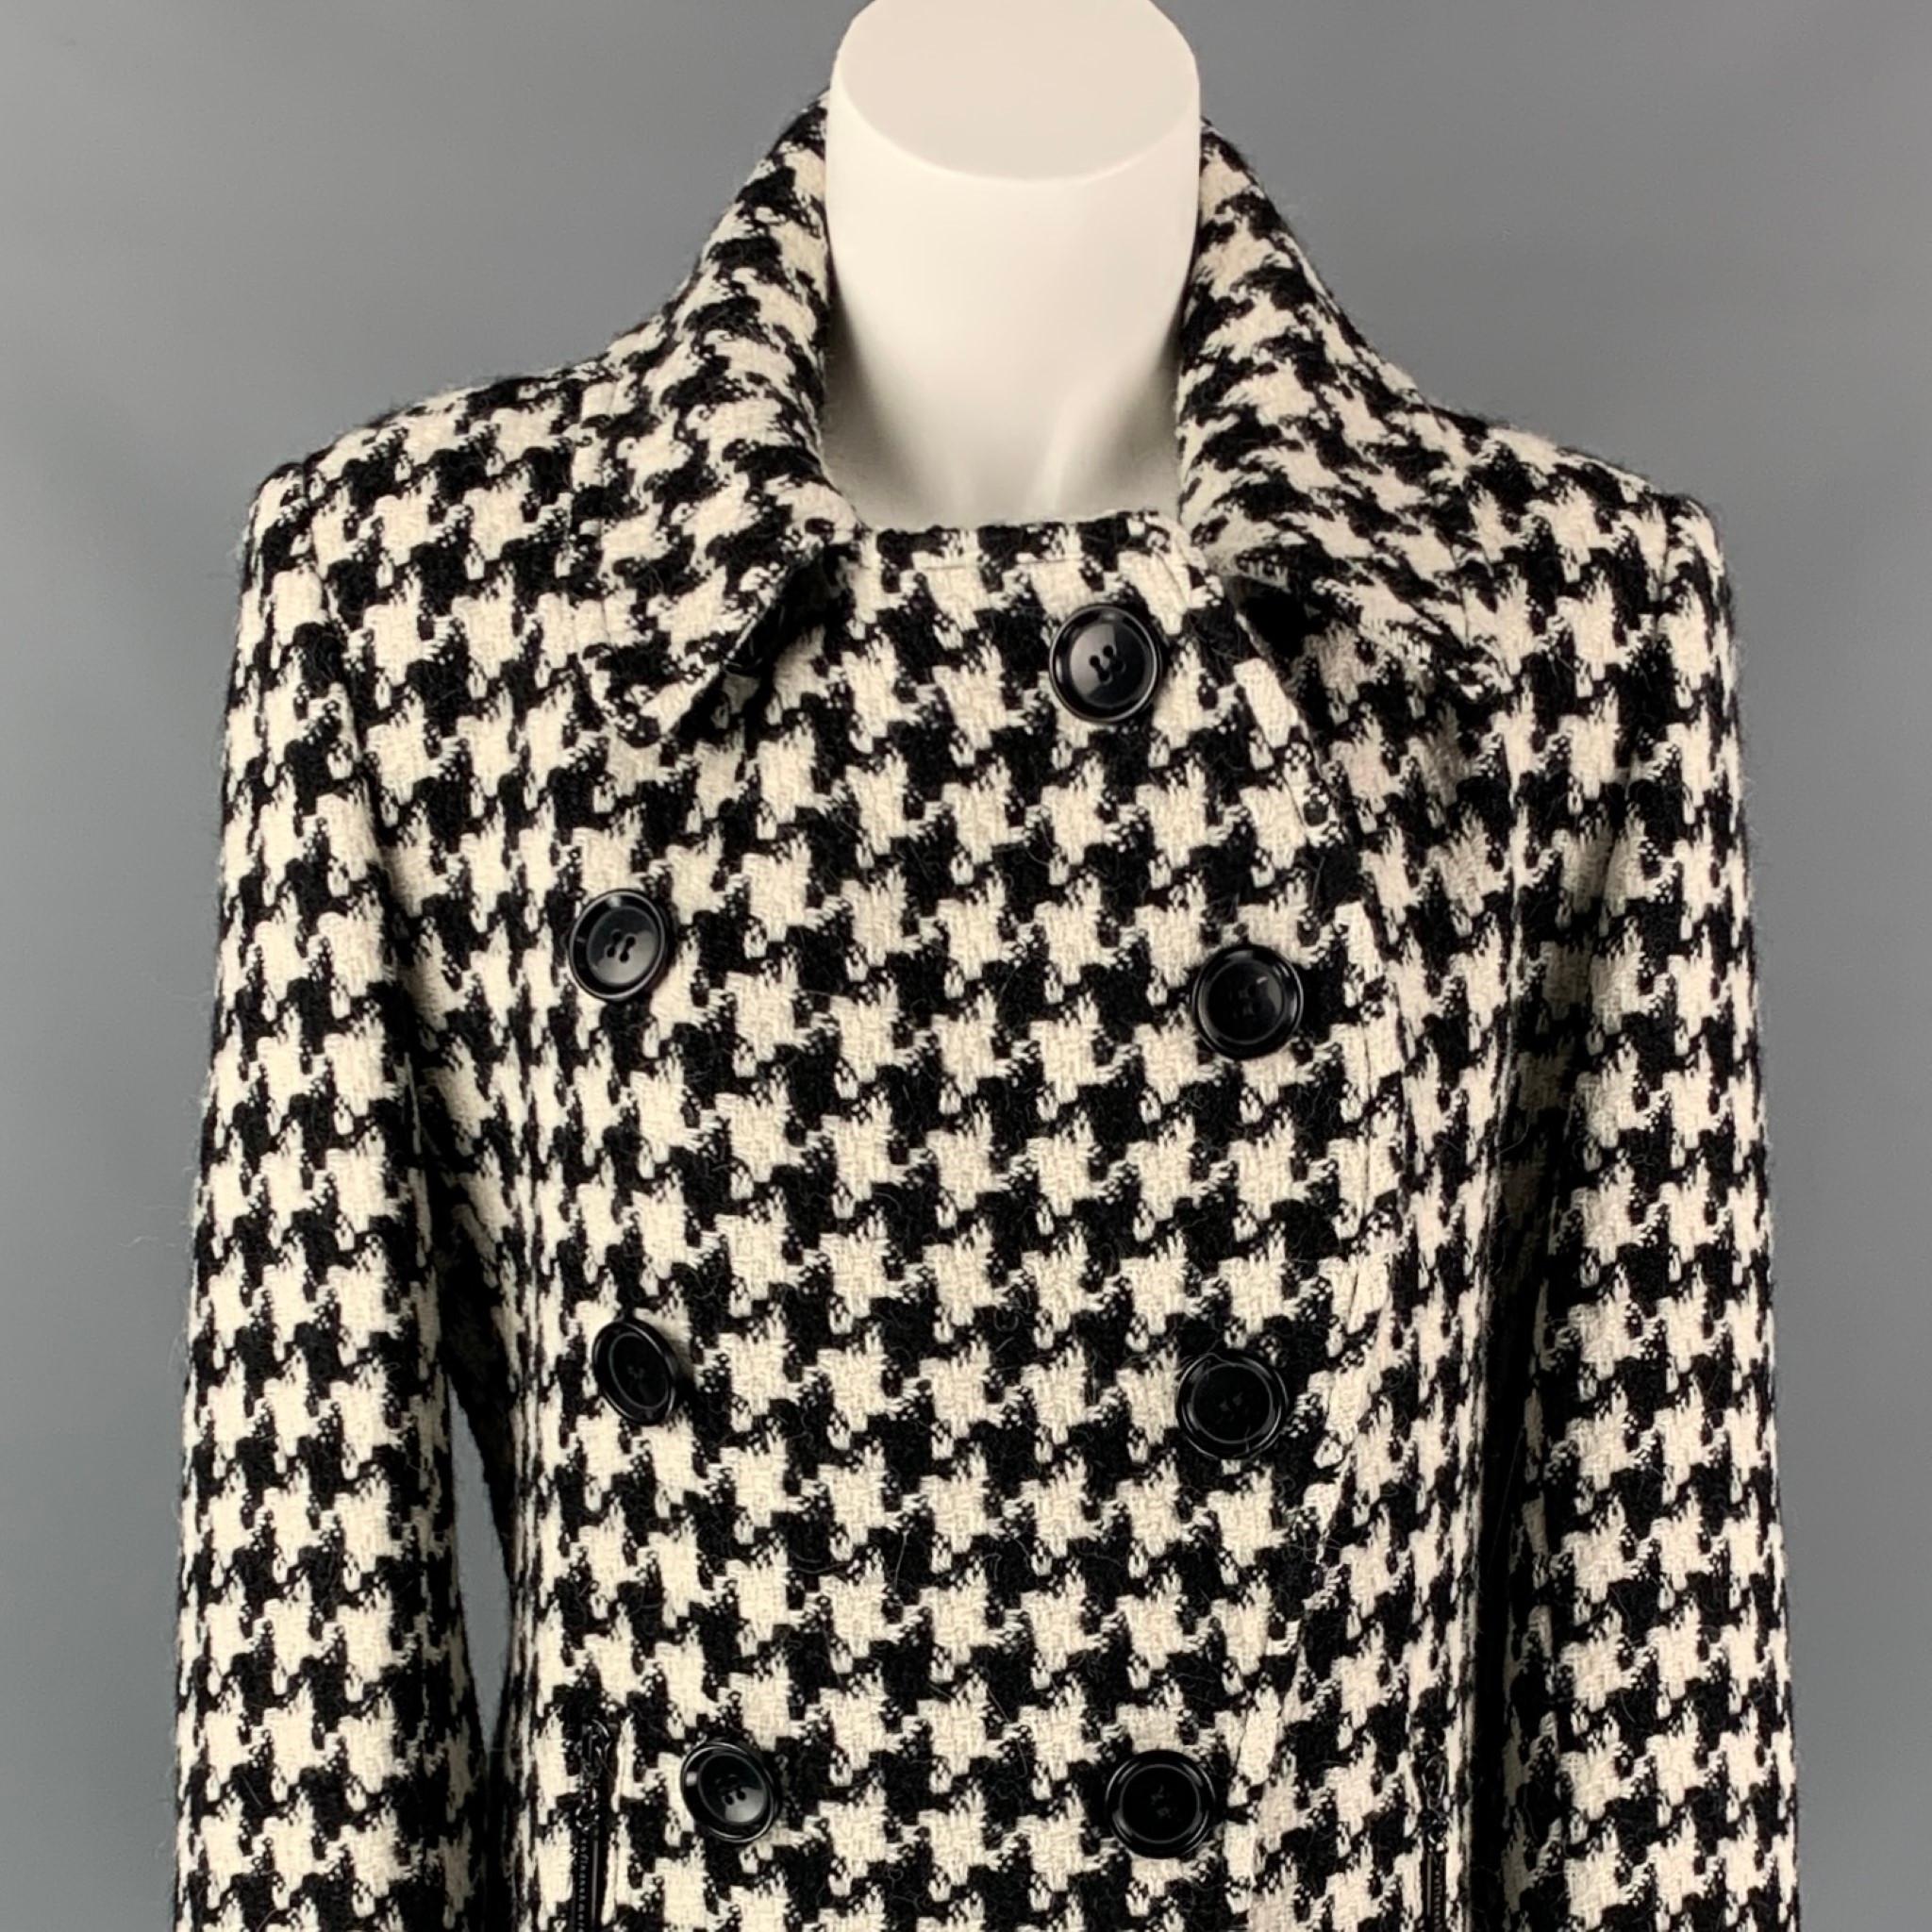 SOFIA CASHMERE coat comes in a black & white houndstooth alpaca / wool with a full liner featuring a large collar, zipper pockets, back strap, and a double breasted closure. 

Very Good Pre-Owned Condition.
Marked: 6
Original Retail: